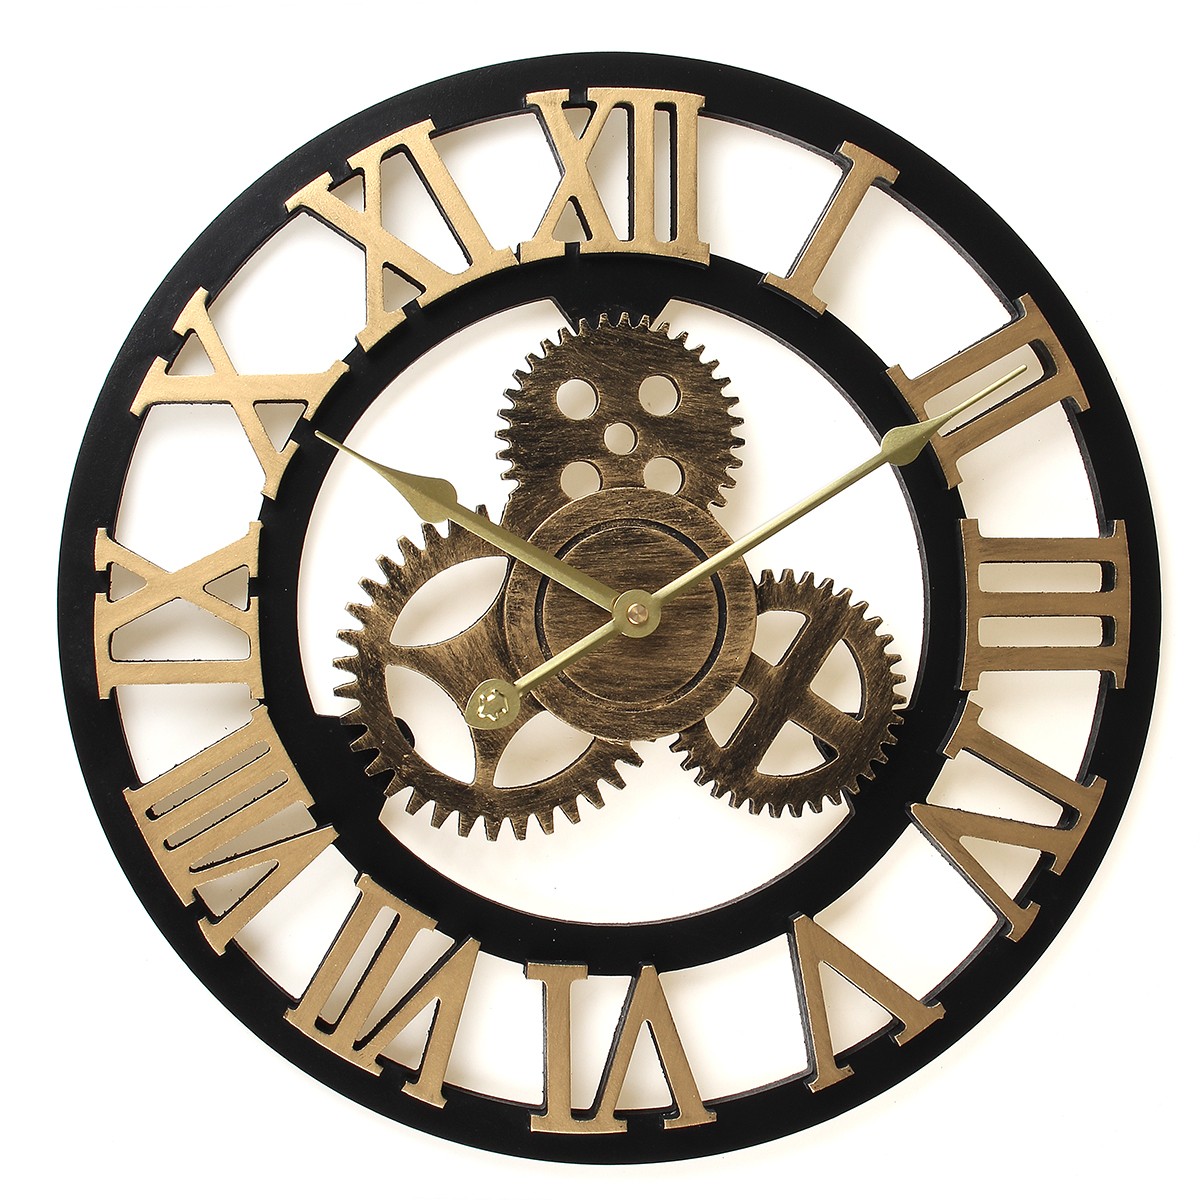 16 inches large 3d gear roman numeral wall clock vintage